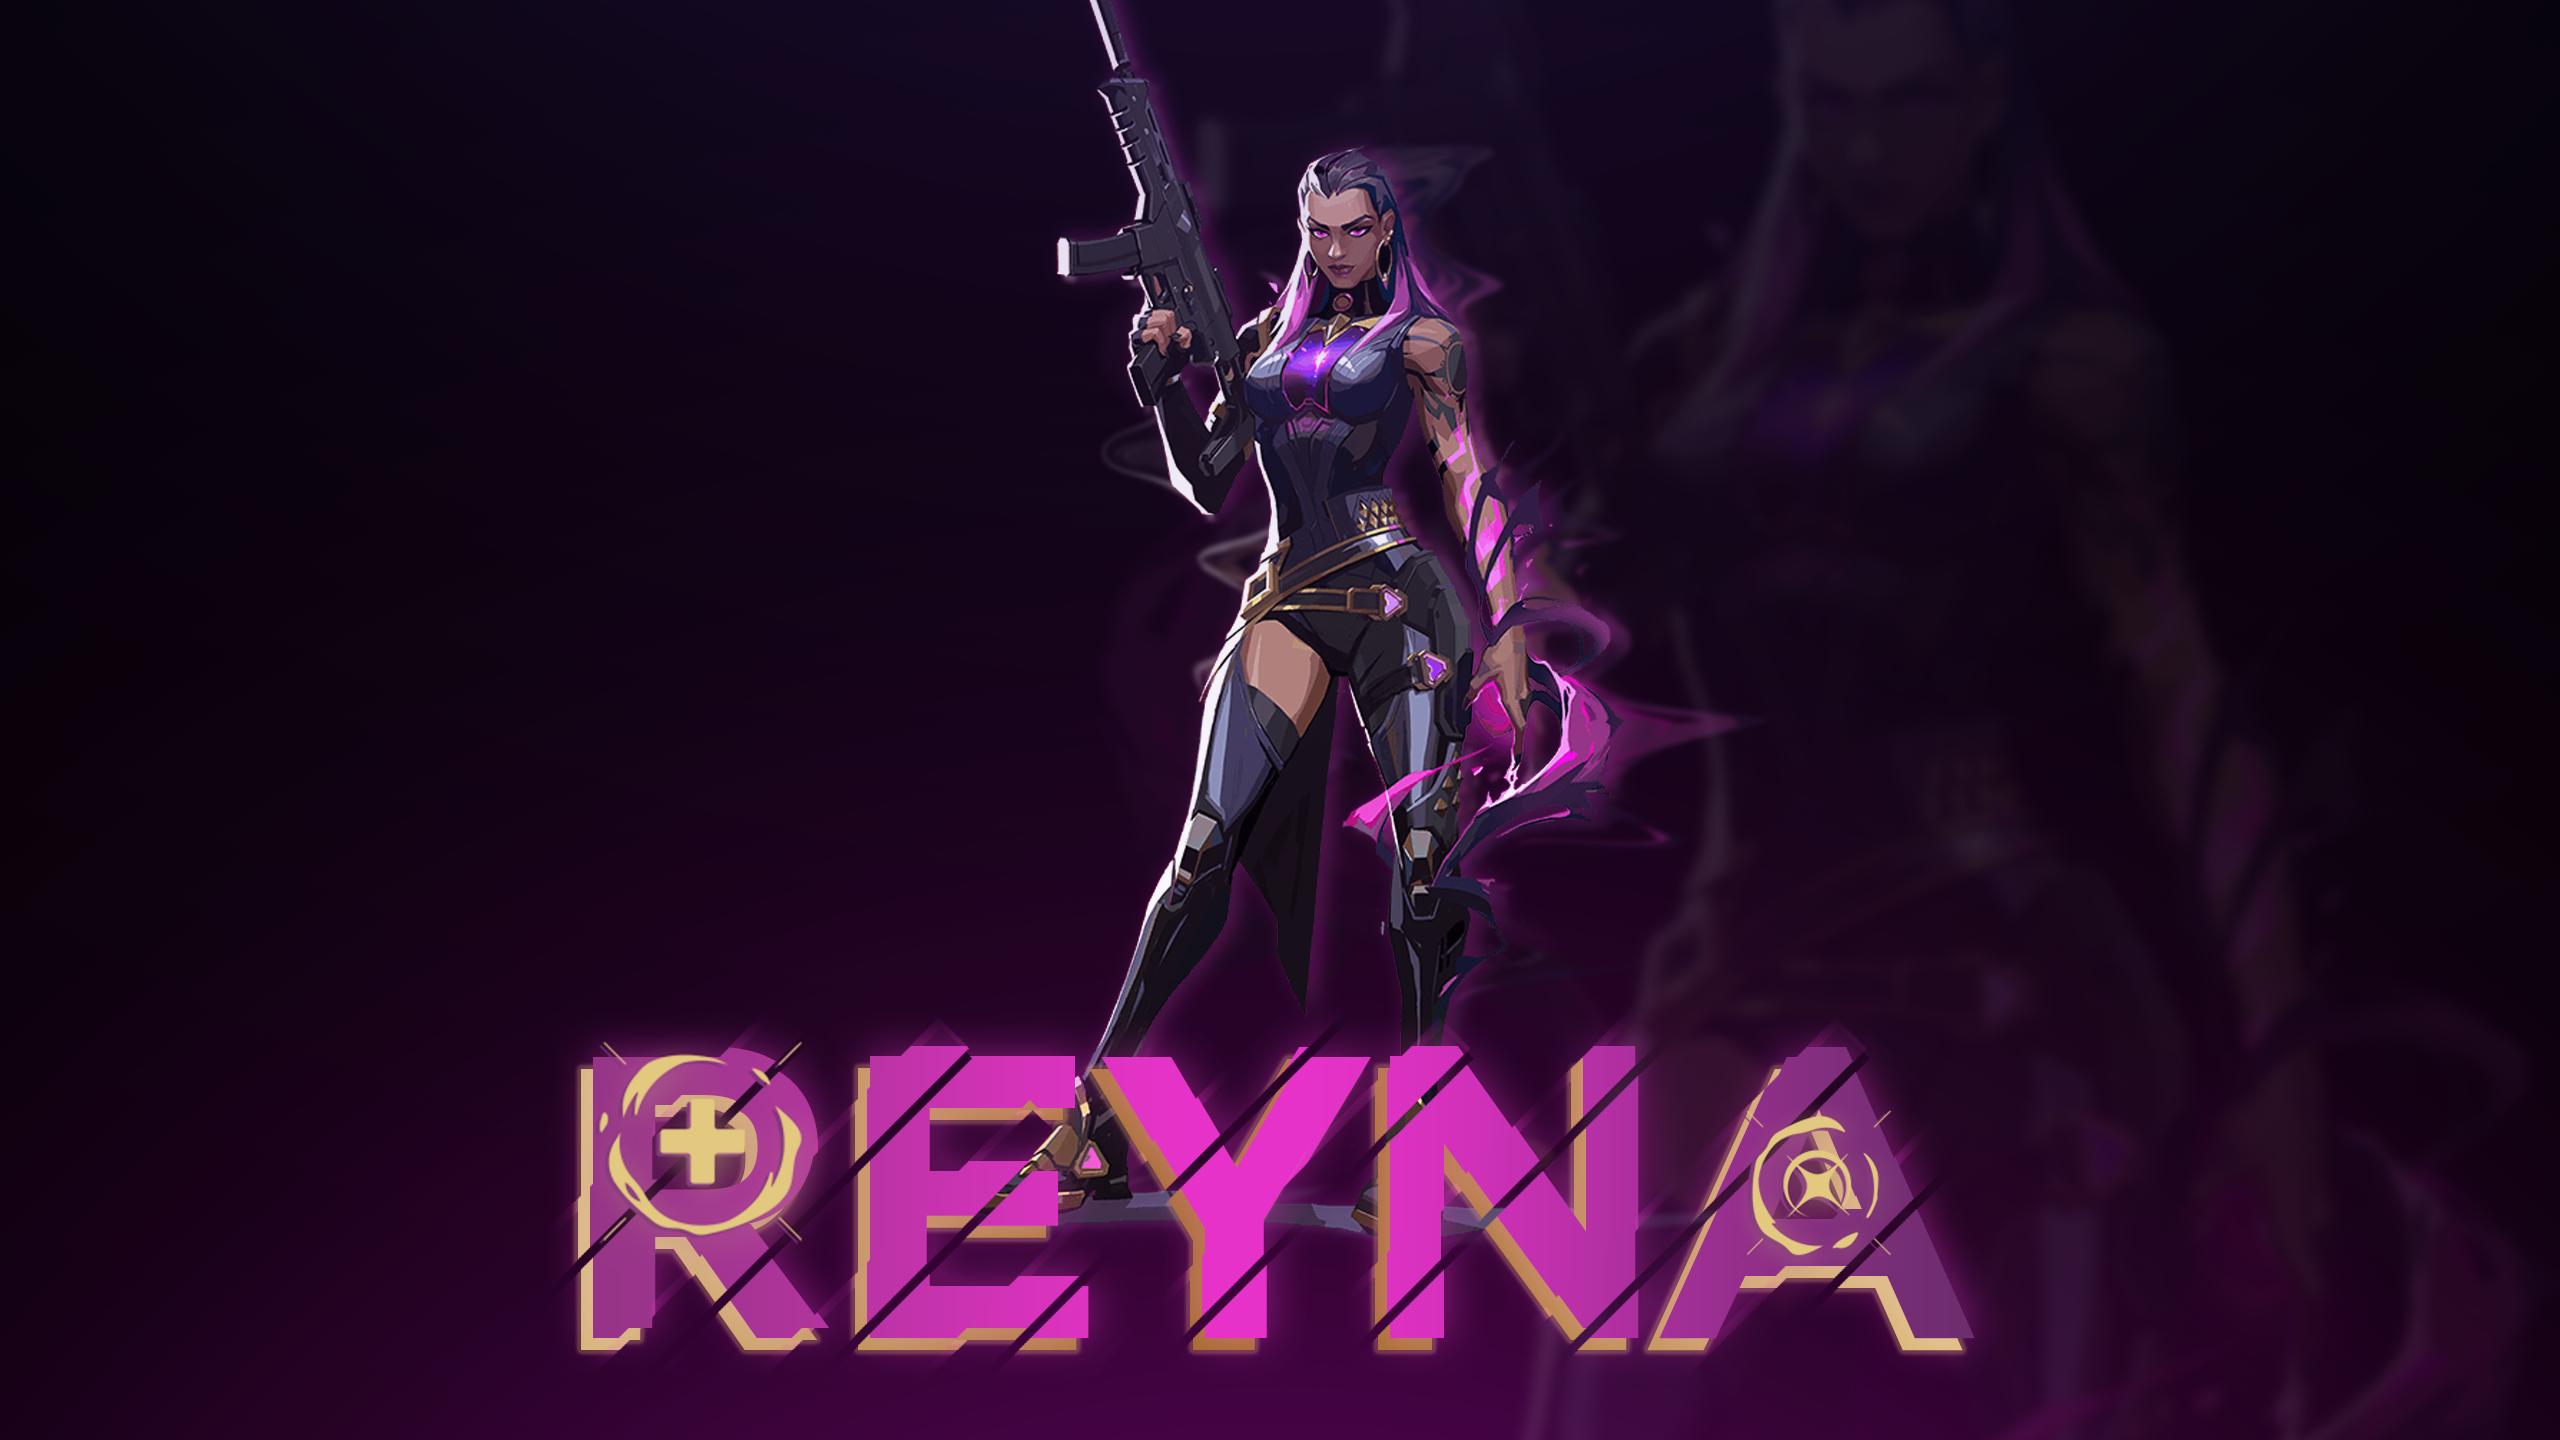 Made a wallpaper for Reyna